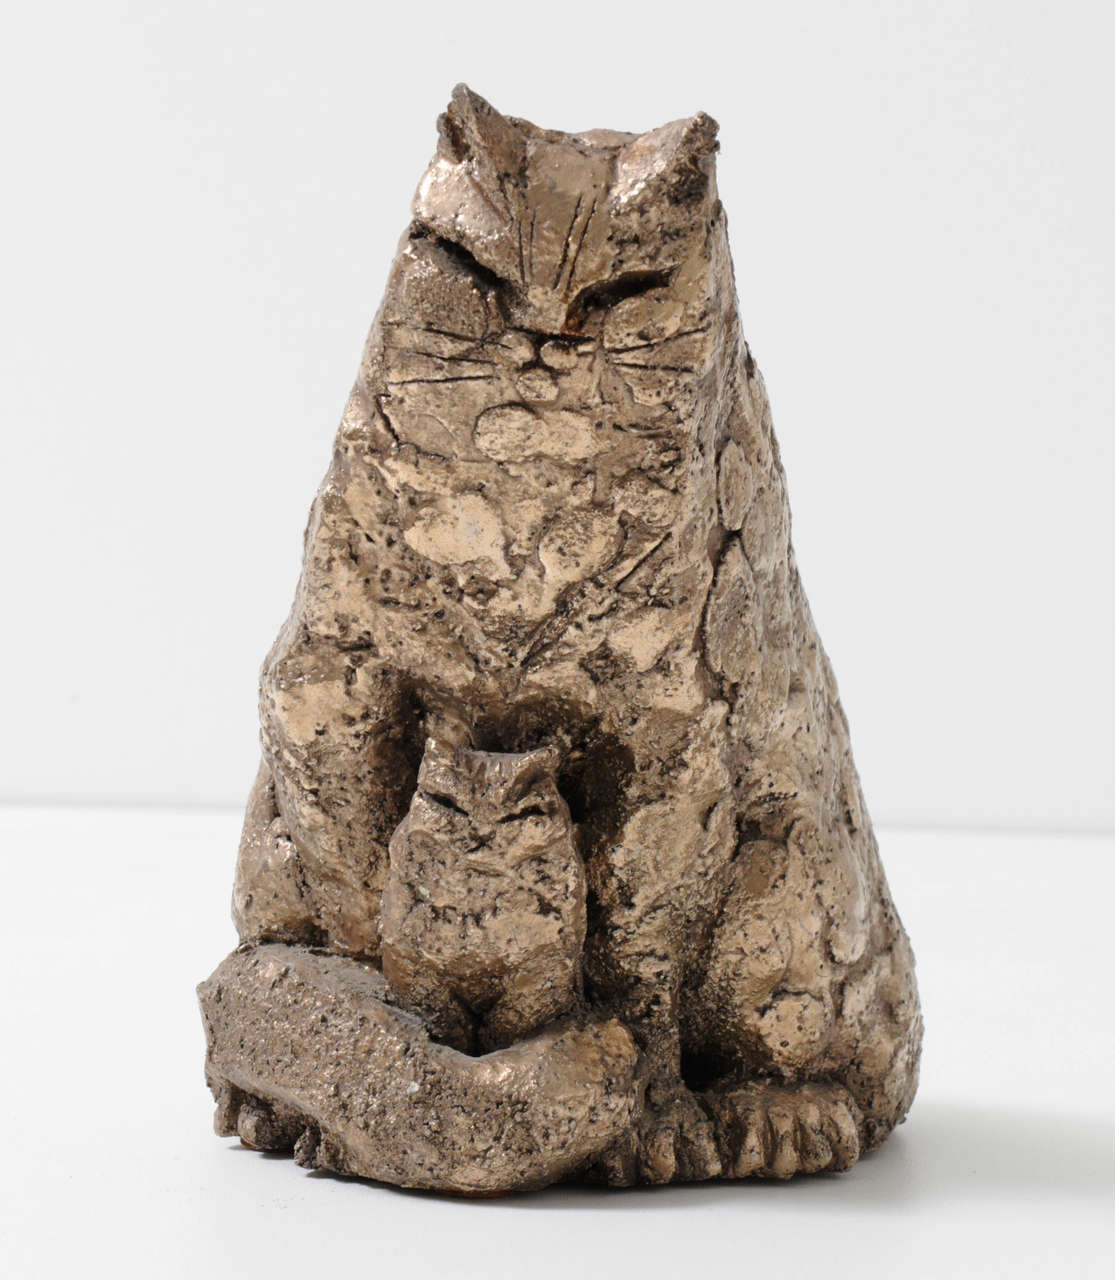 A ceramic cat with baby cat in a textured bronzed glaze, signed with Karel, 1970s.